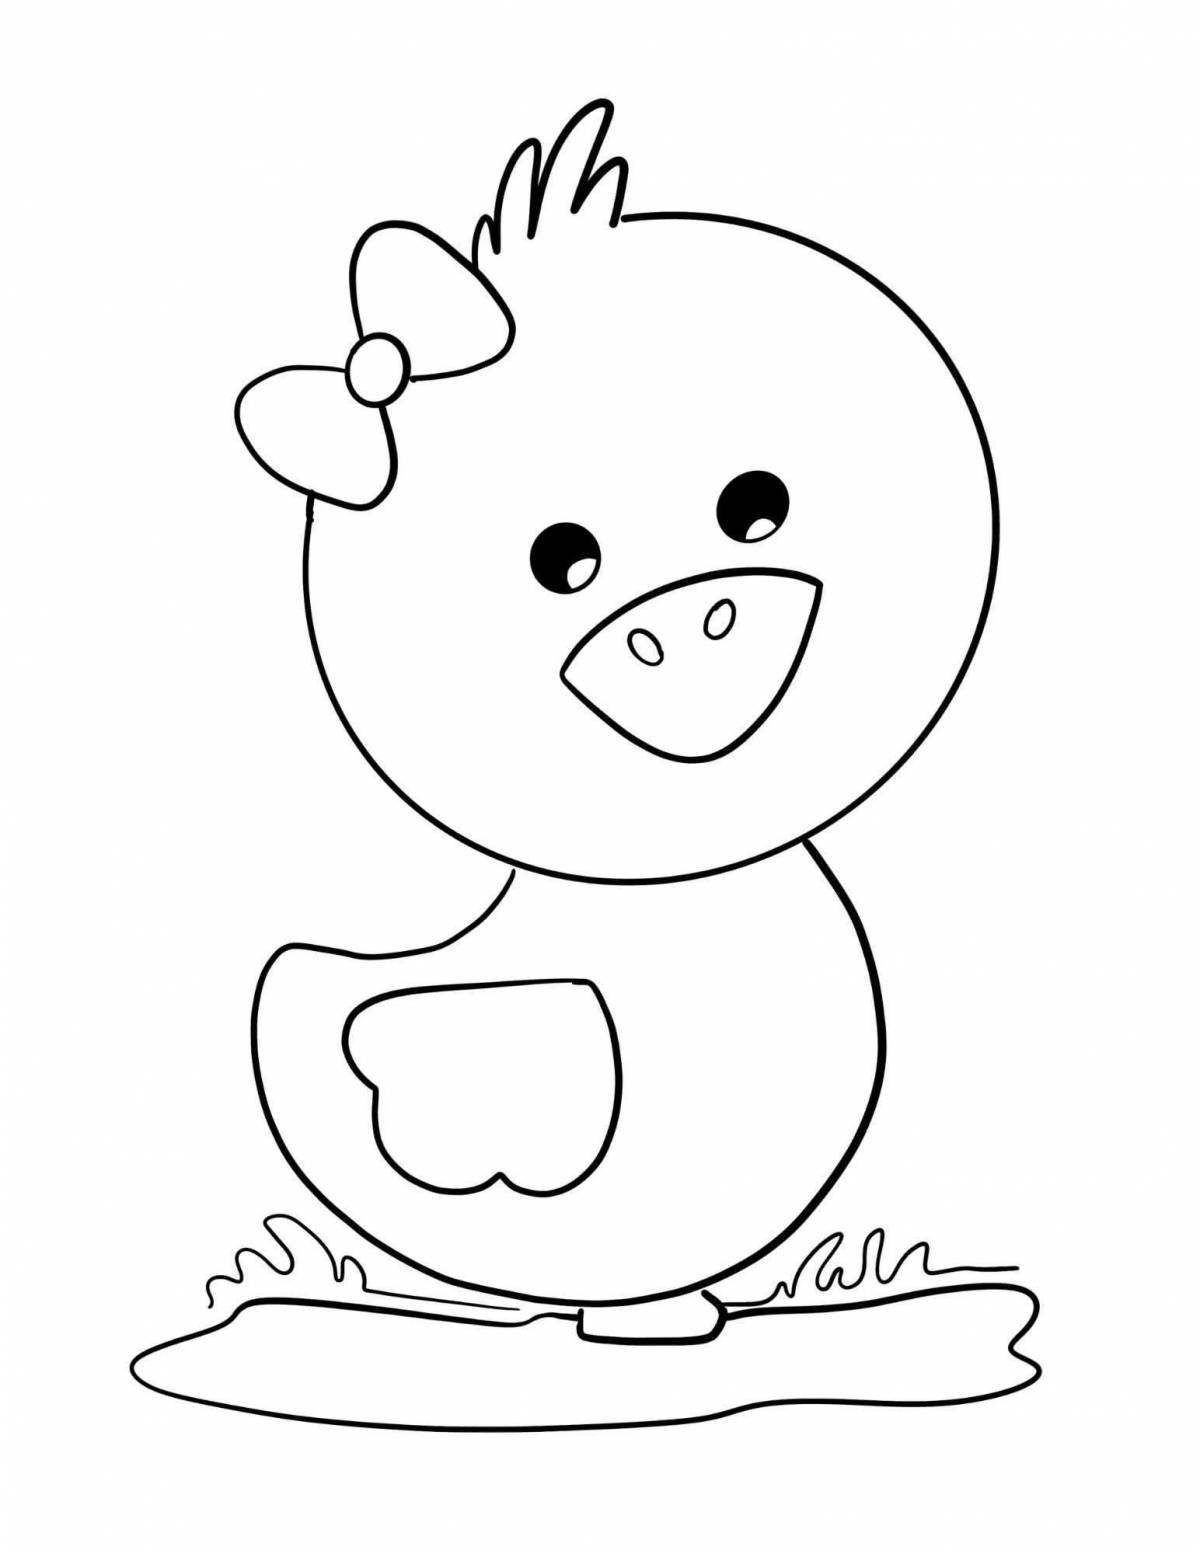 Coloring funny duck for children 3-4 years old